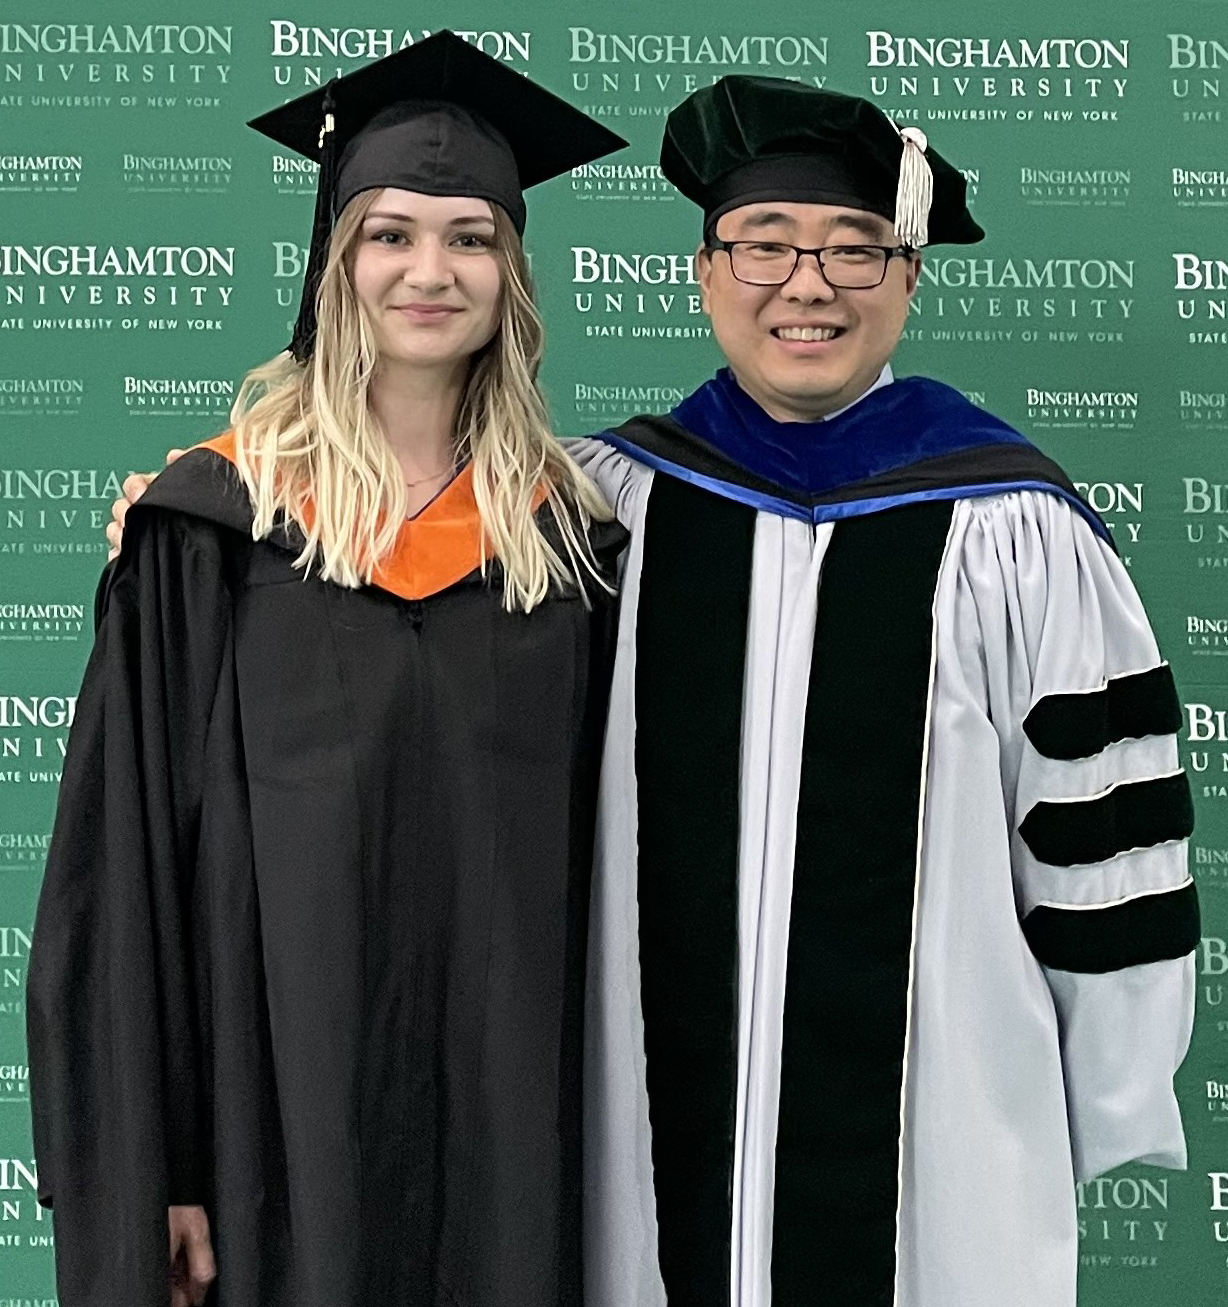 Mya Landers ’21, MS ’22, credits the mentorship of Professor Seokheun “Sean” Choi, a faculty member in Watson College’s Department of Electrical and Computer Engineering, for helping her as an undergraduate and graduate student.